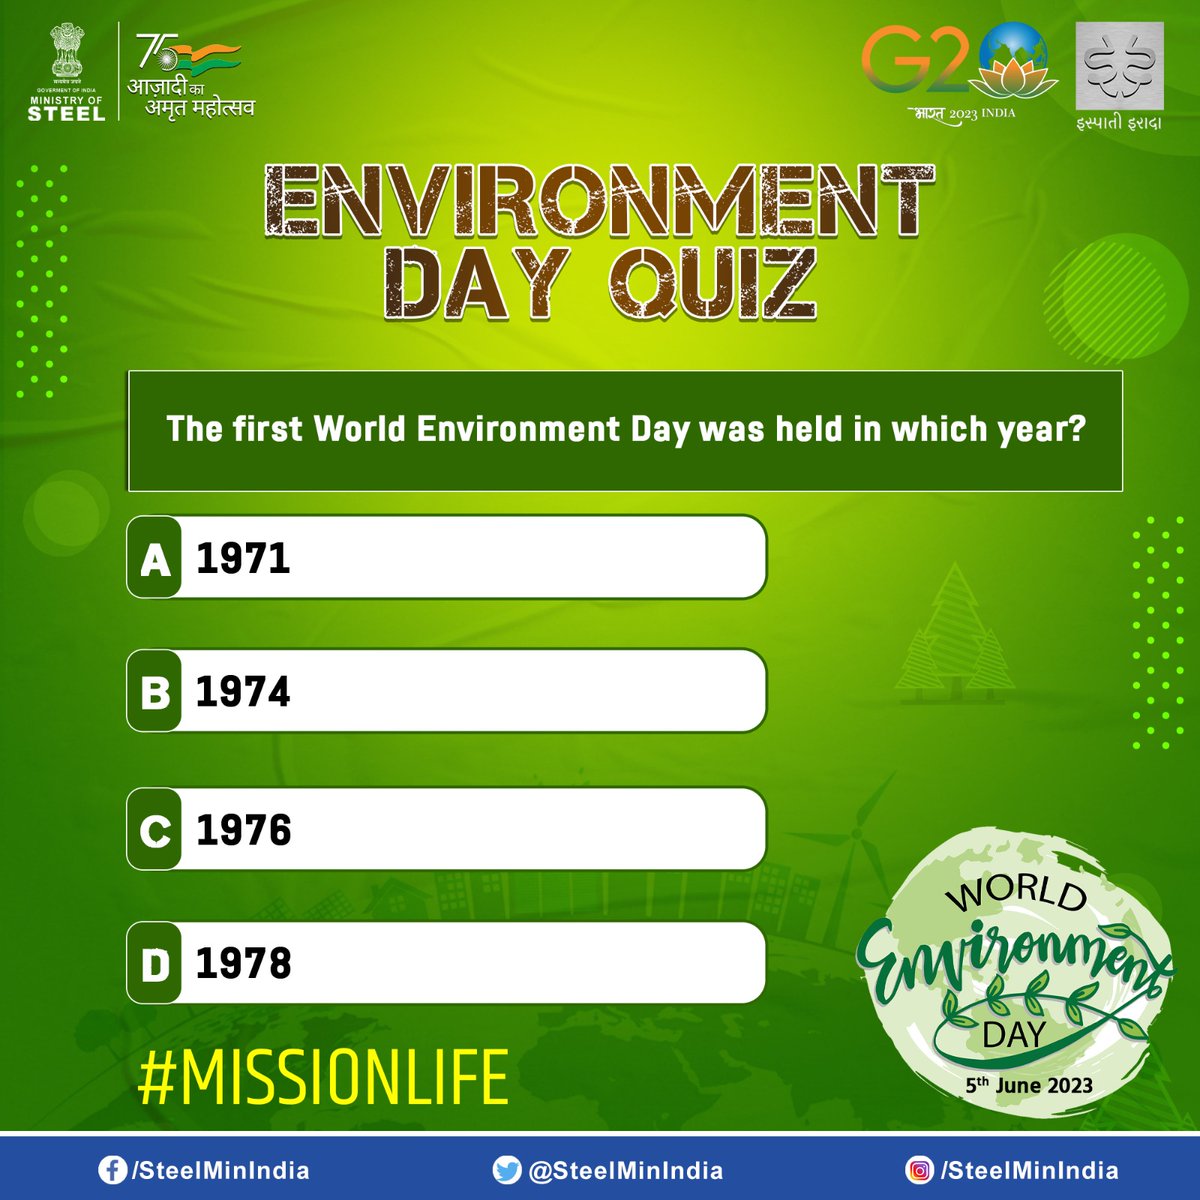 🌍 Join our World Environment Day quiz and test your eco-knowledge! 🌱 

Challenge yourself, learn, and celebrate nature's beauty. 🌿

#MissionLiFE #WorldEnvironmentDay #QuizTime #EcoTrivia 
@moefcc